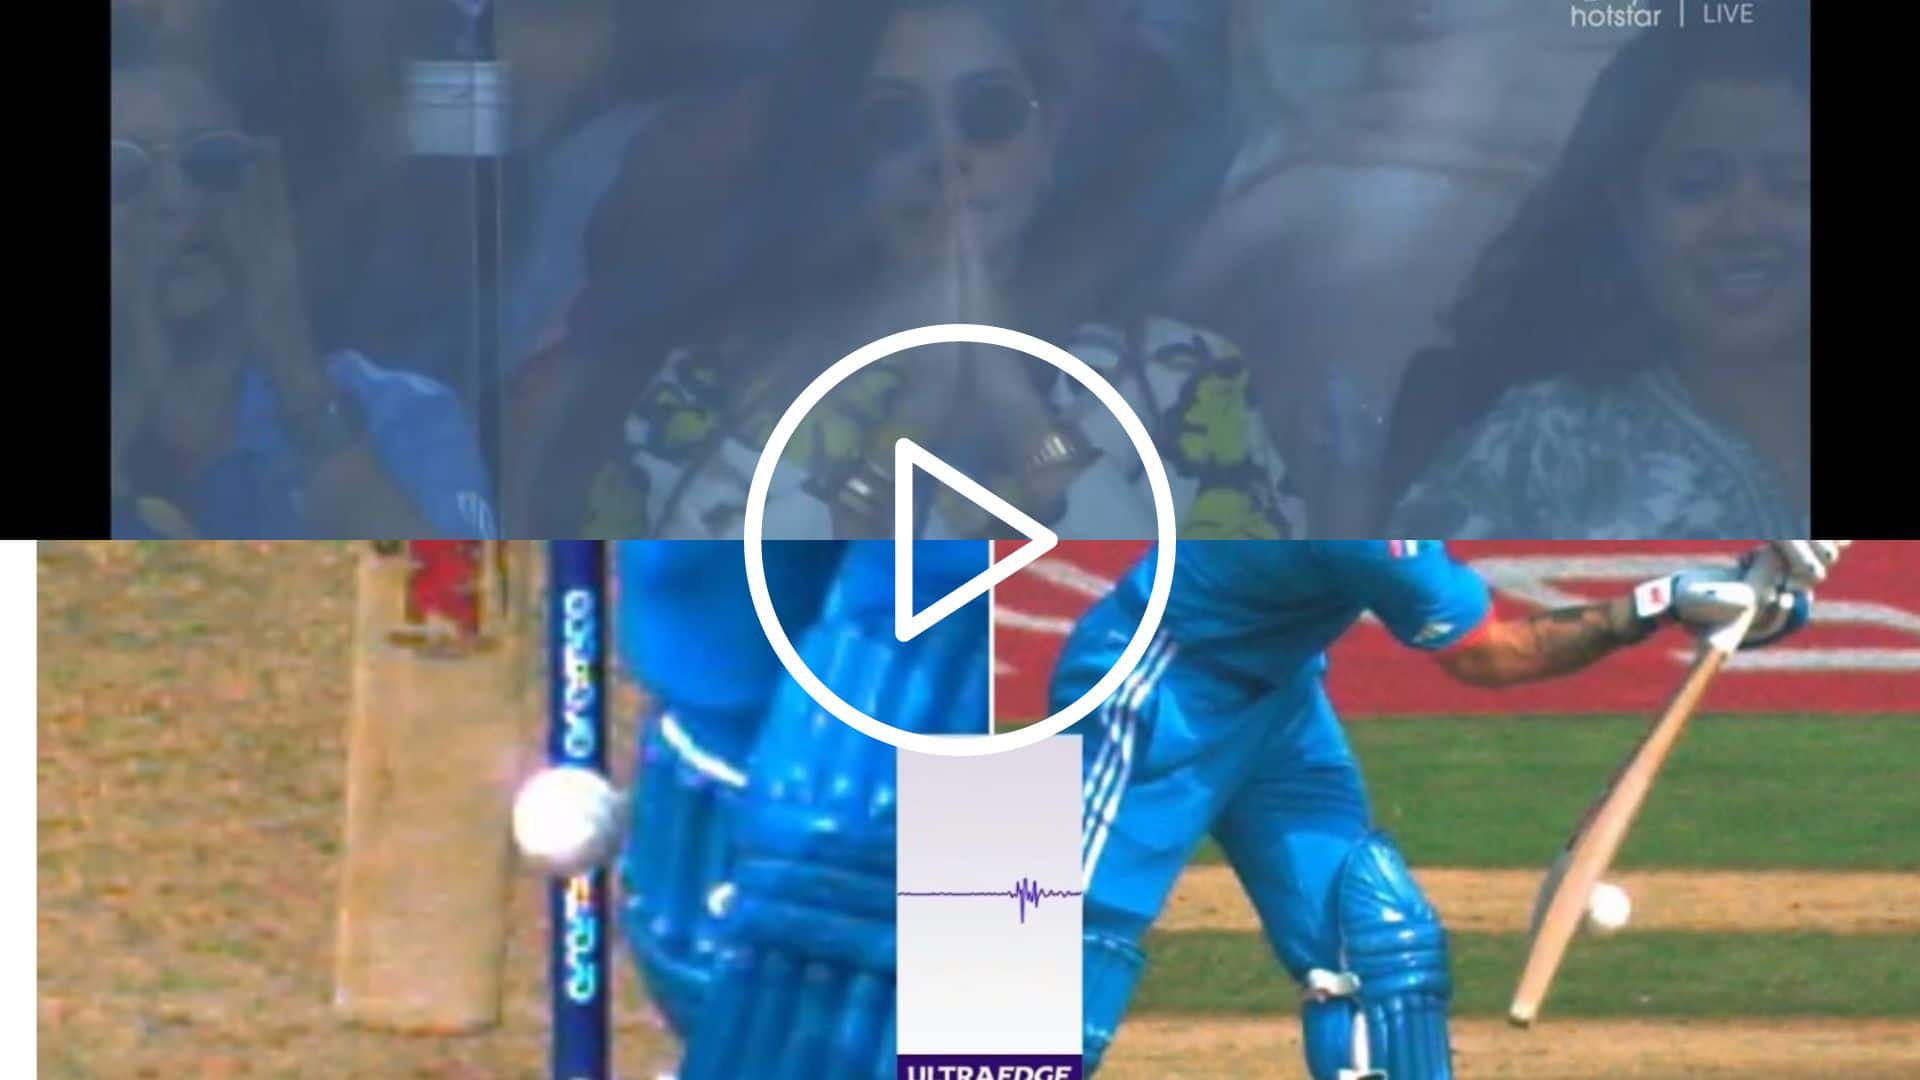 [Watch] Anushka Sharma Almost Had 'Heart In Her Mouth' As Virat Kohli Nearly Survives LBW